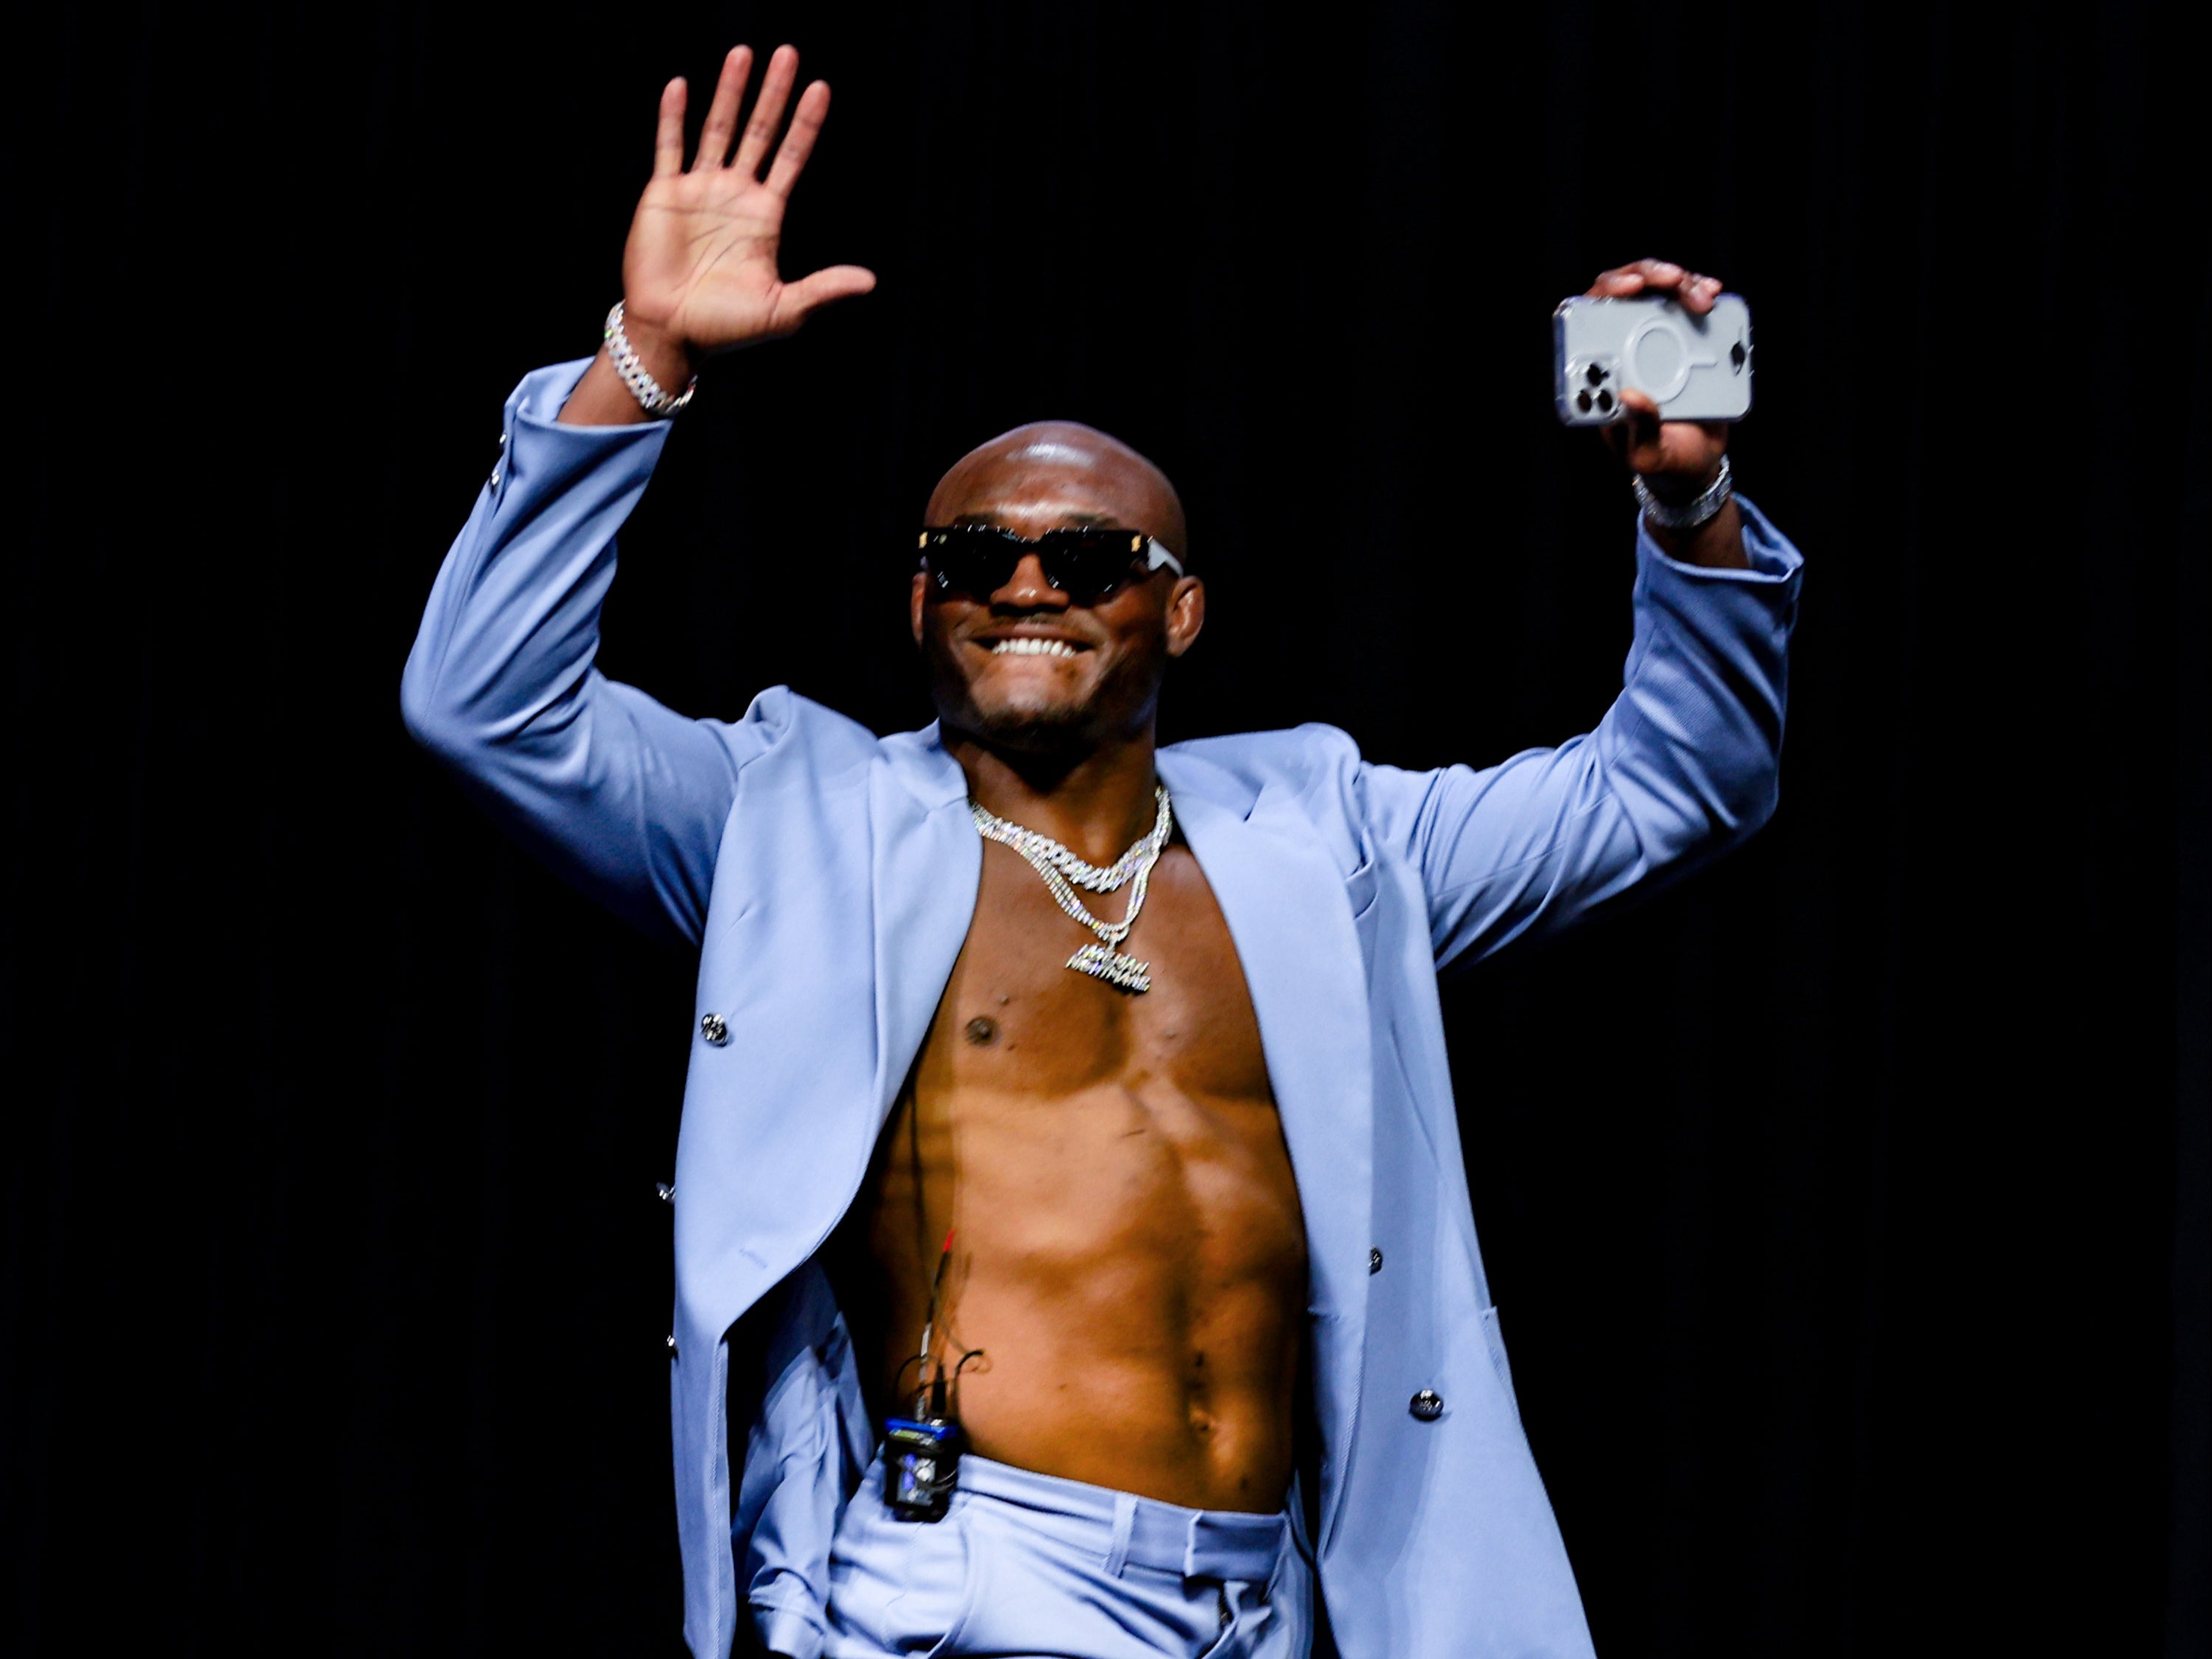 Leon Edwards Kamaru Usman can follow his fashion dreams after UFC 286 The Independent